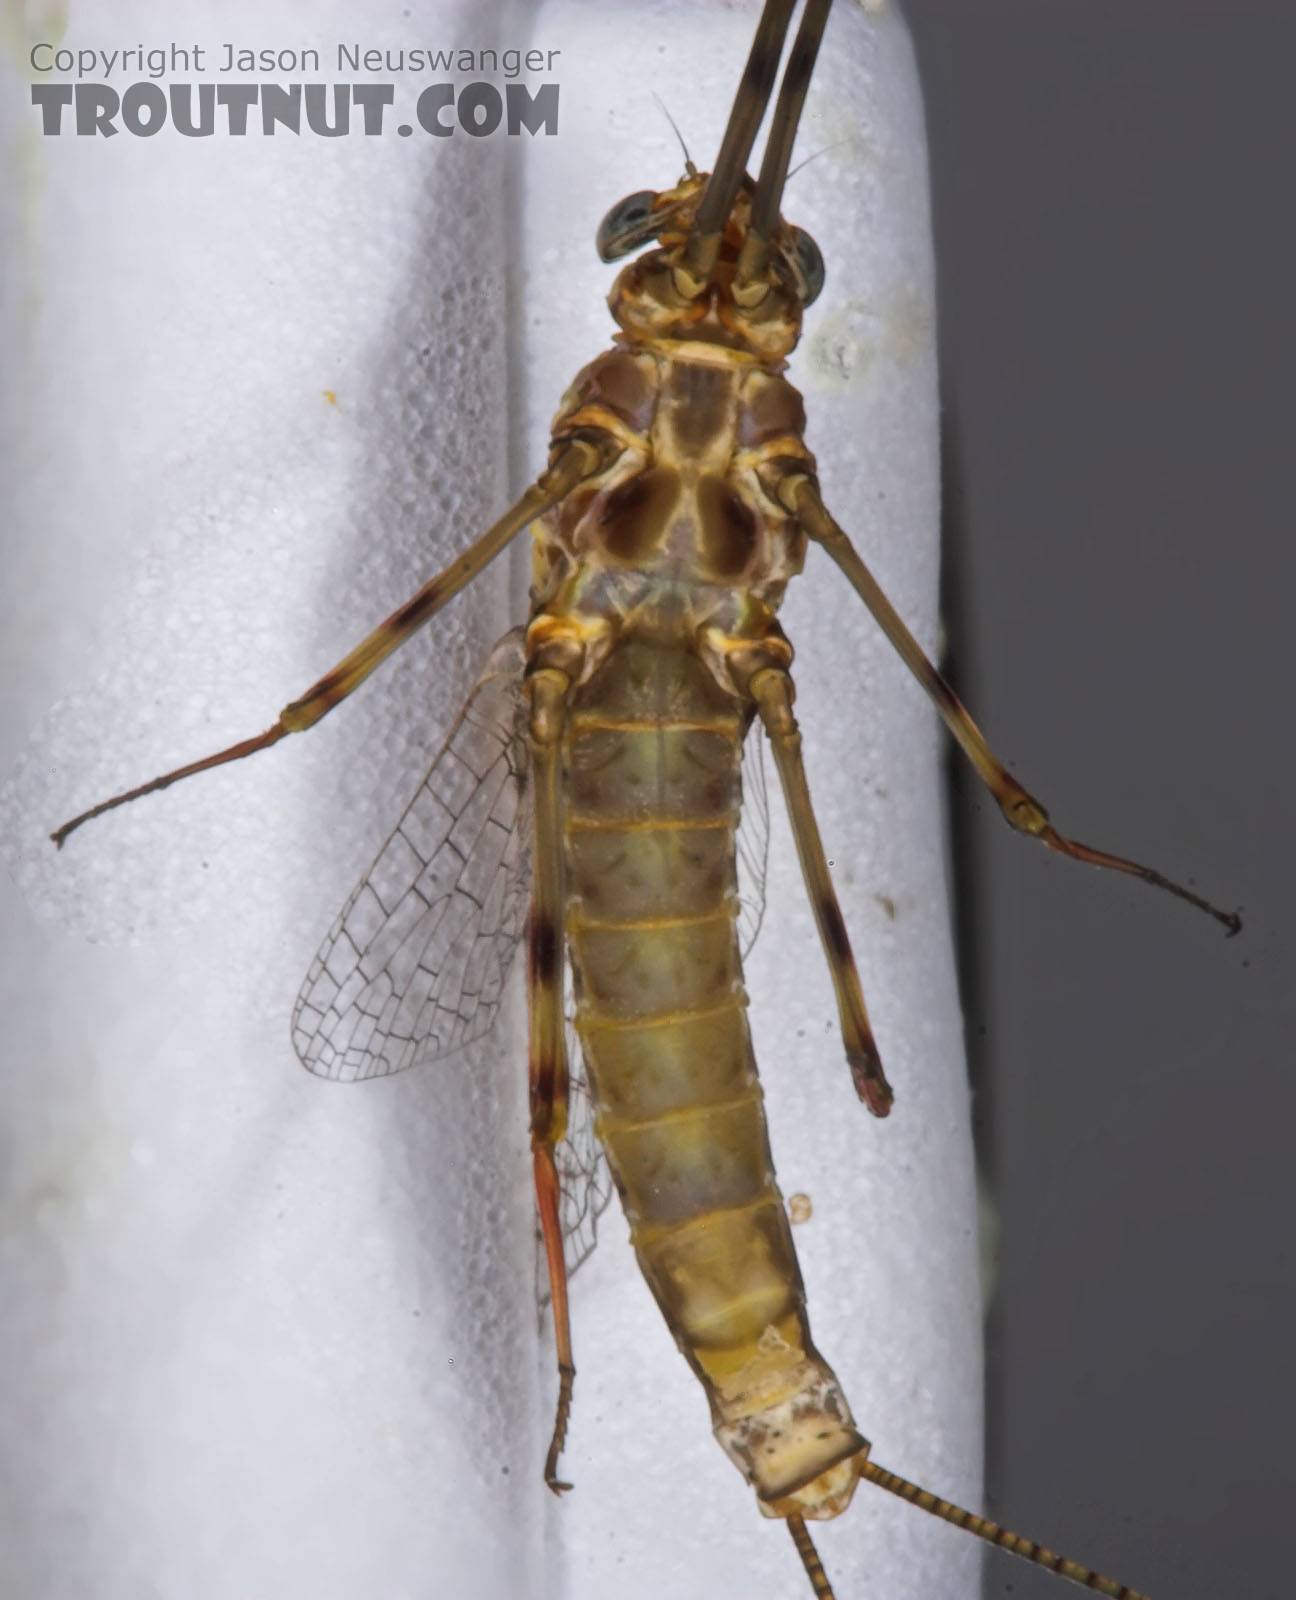 Female Maccaffertium vicarium (March Brown) Mayfly Spinner from the Bois Brule River in Wisconsin